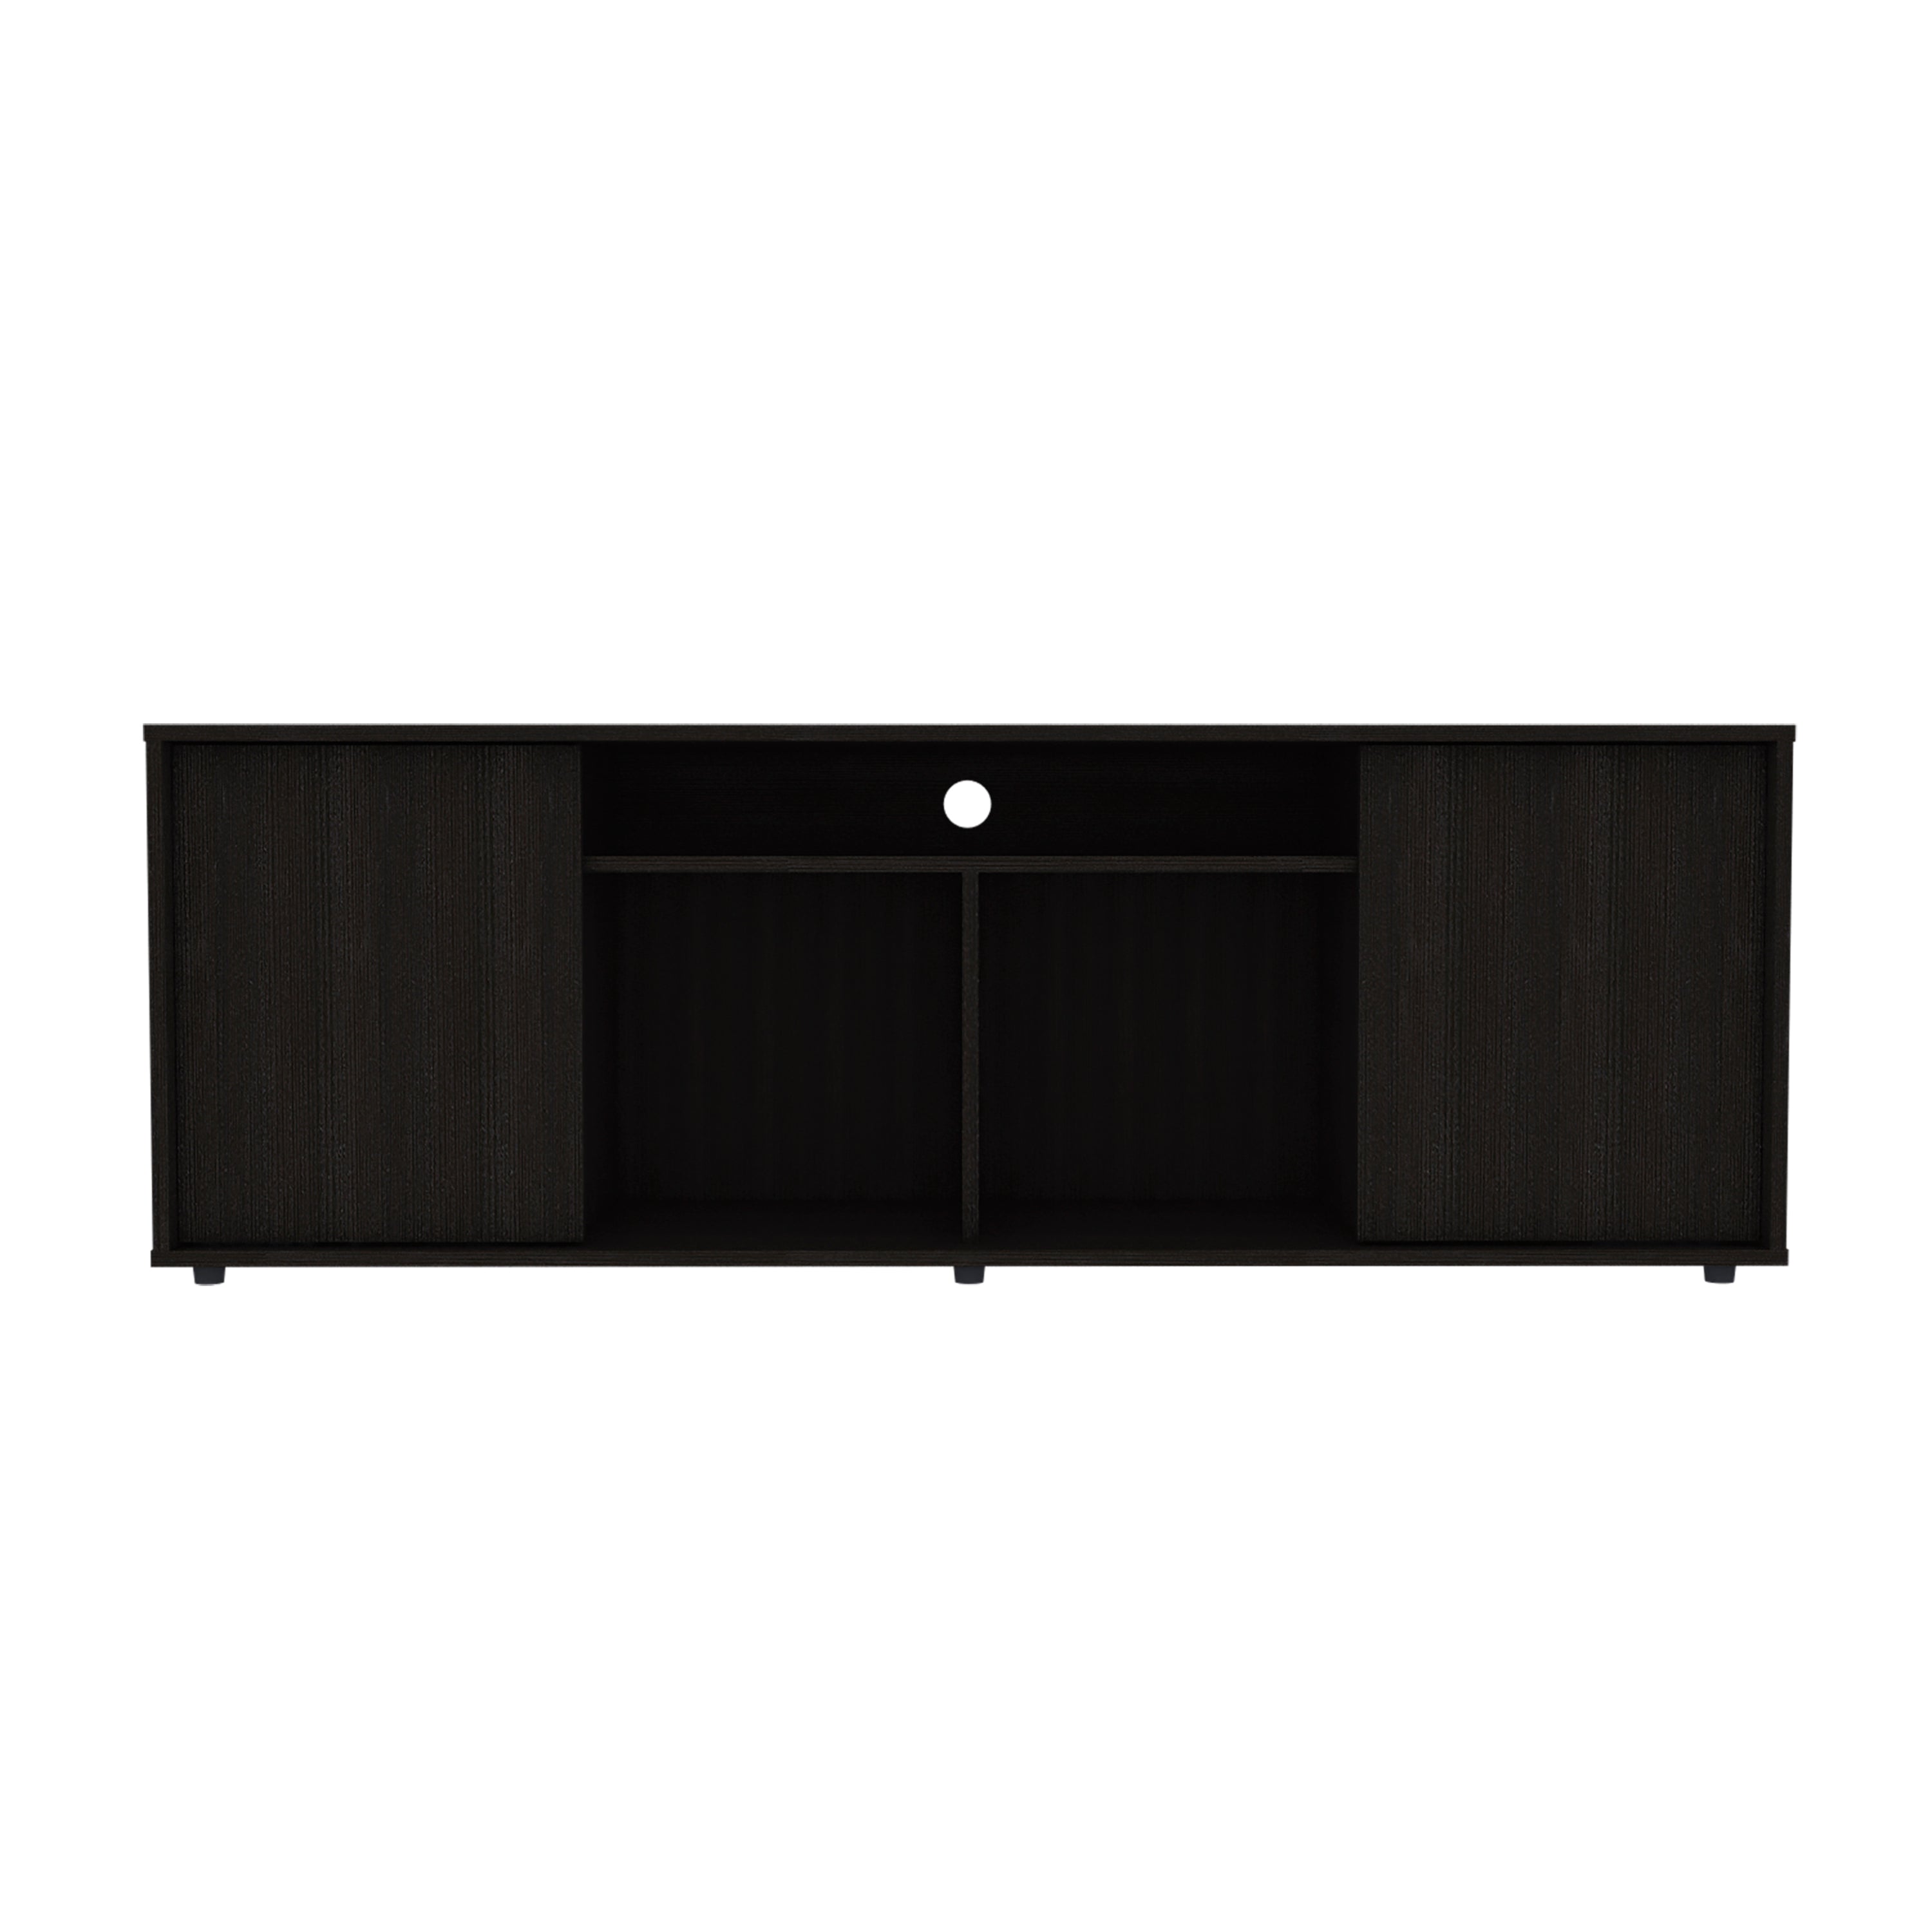 TV Stand fot TV up 60" Four Shelves, Two Cabinets With Single Door